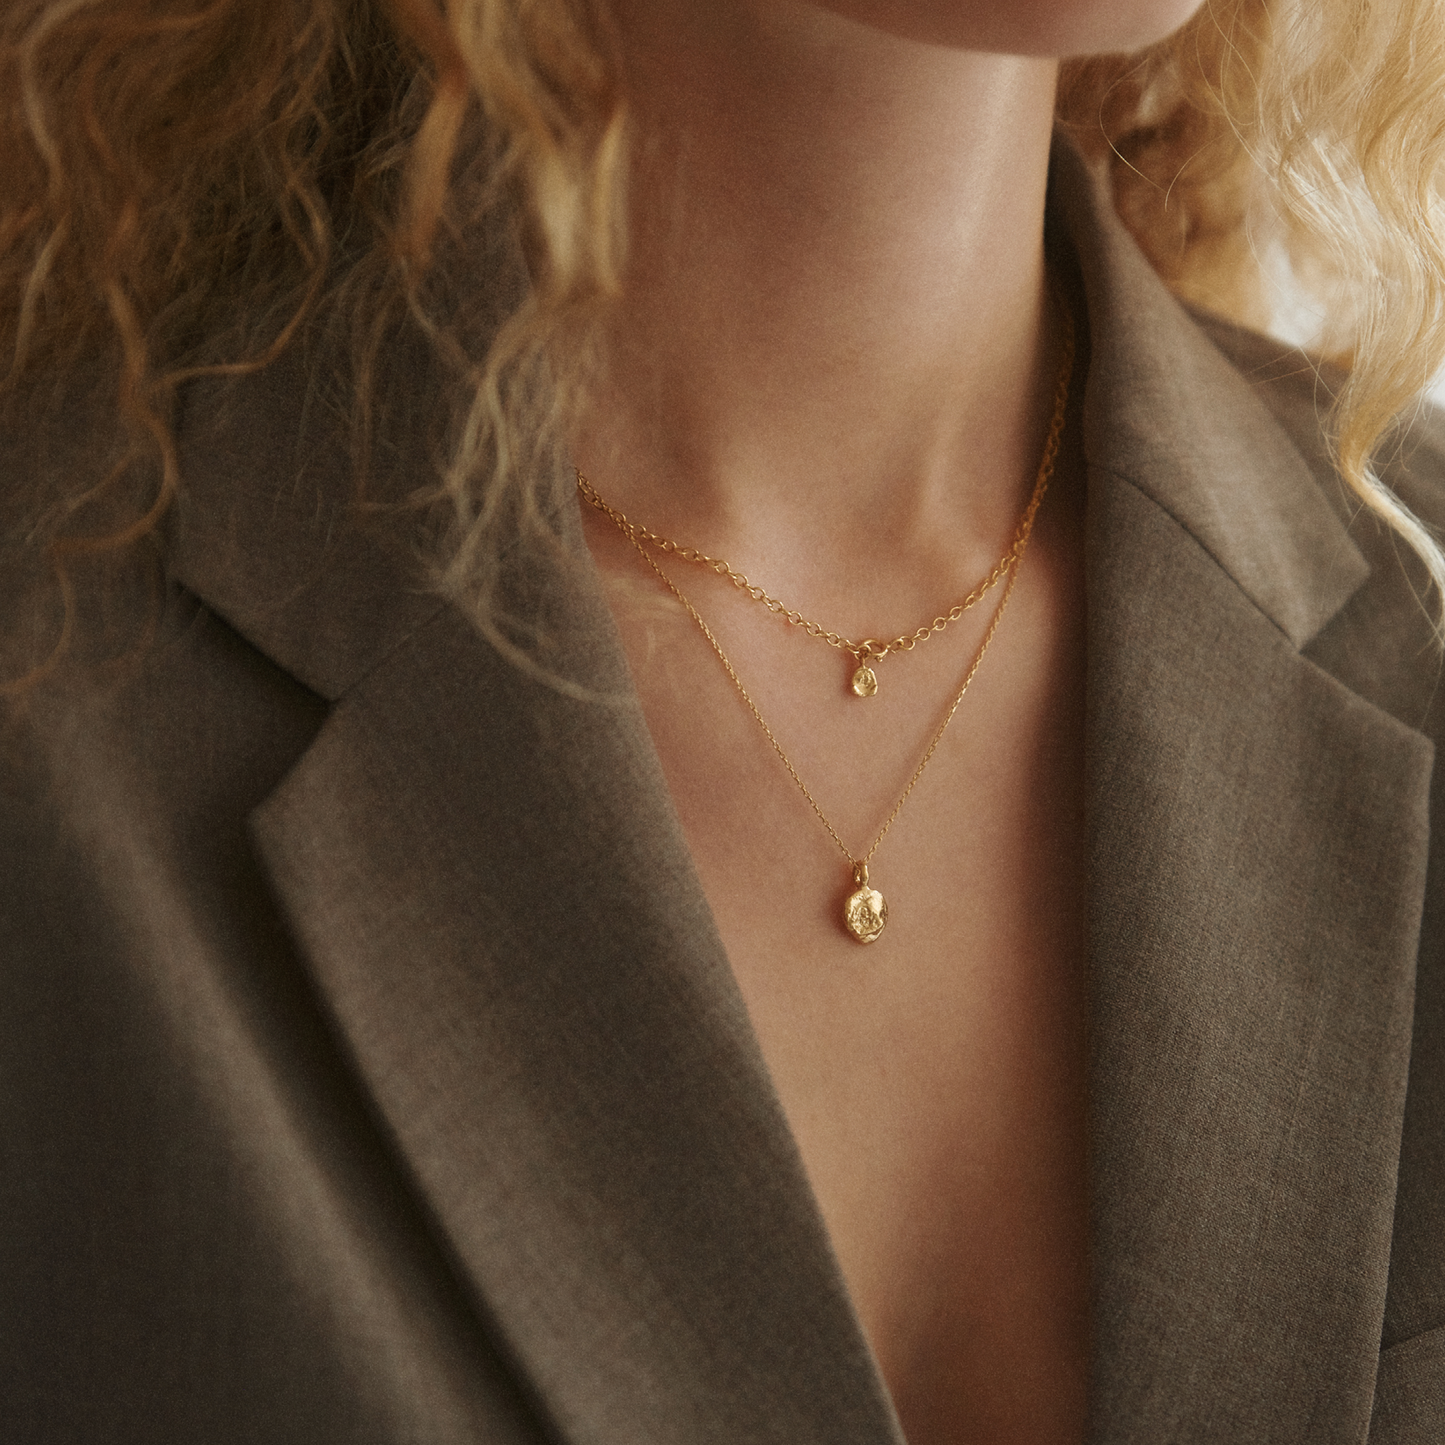 Moment Necklace, Gold-plated